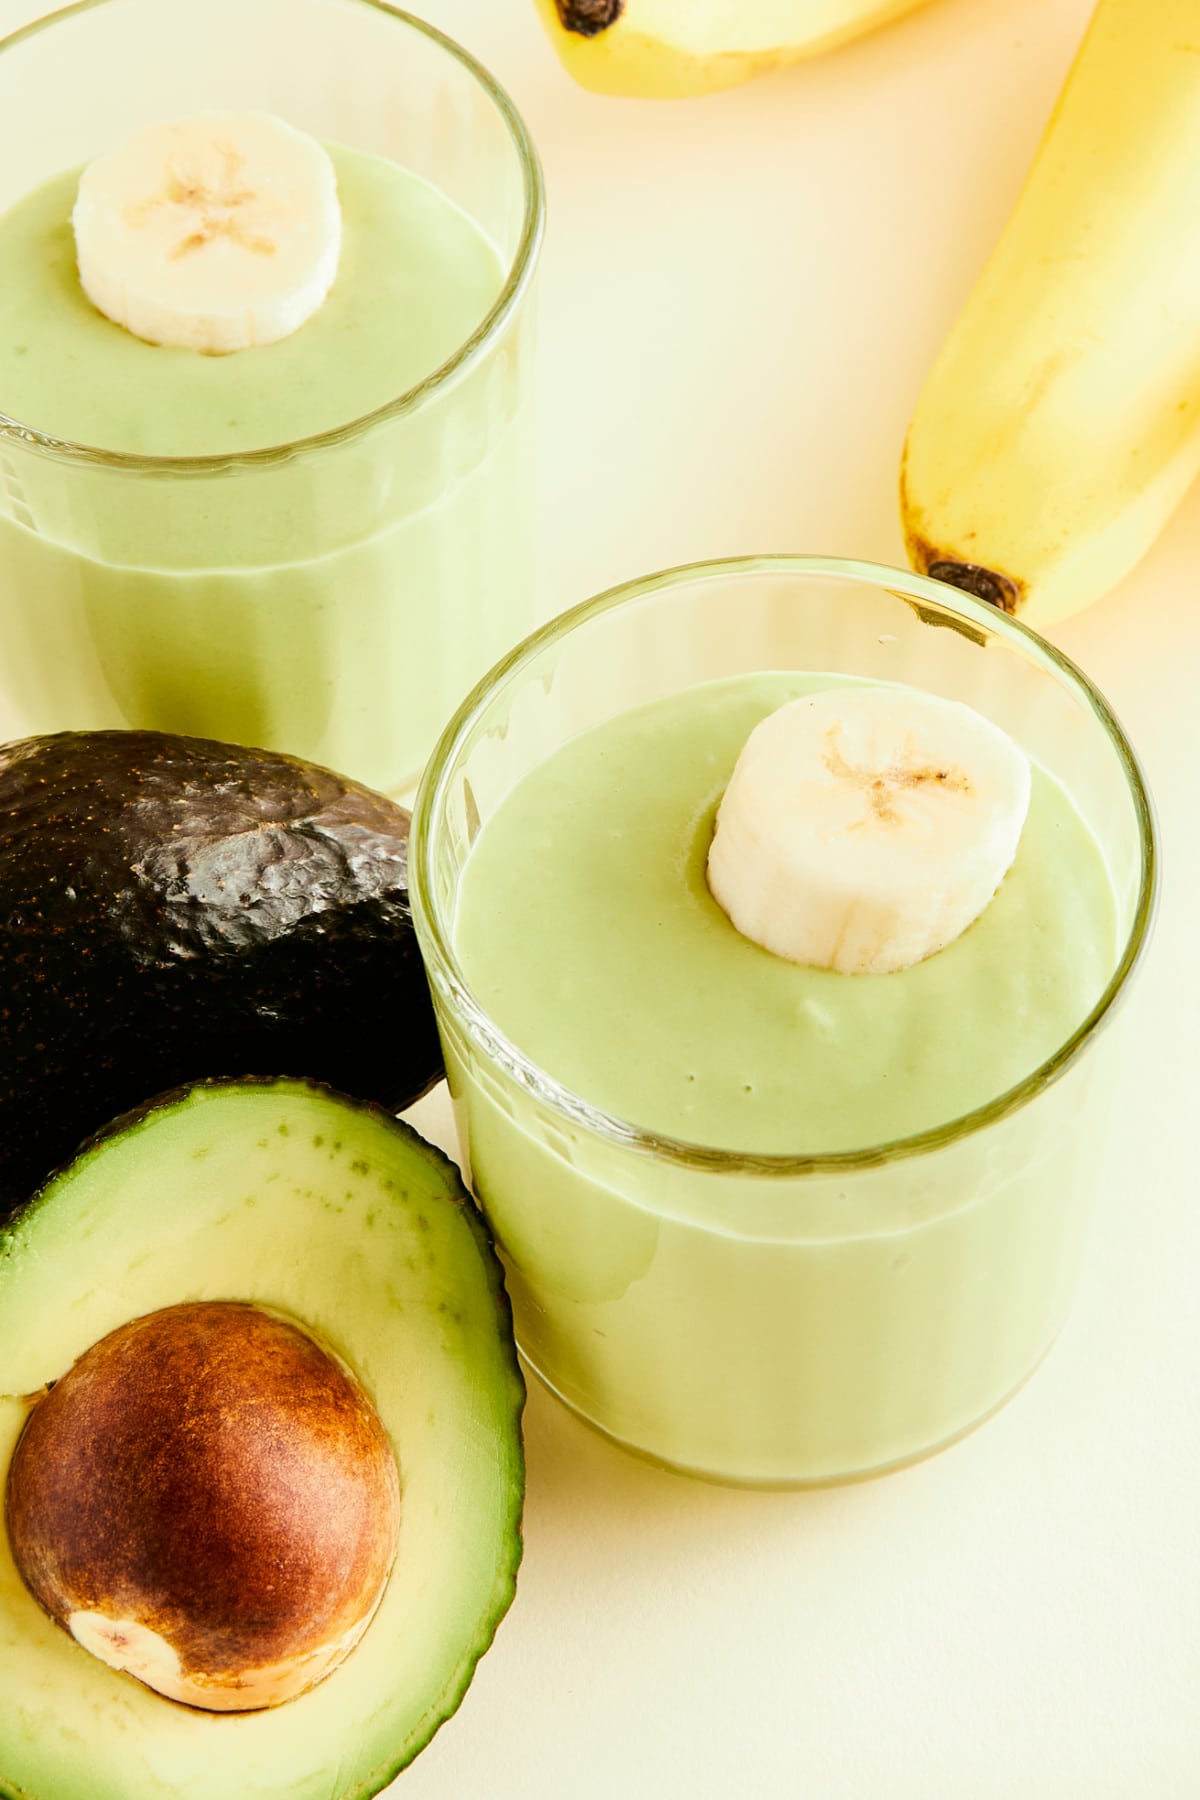 Two glasses of light green avocado drink garnished with banana slices. Whole bananas and an avocado sliced in half sit on the side.